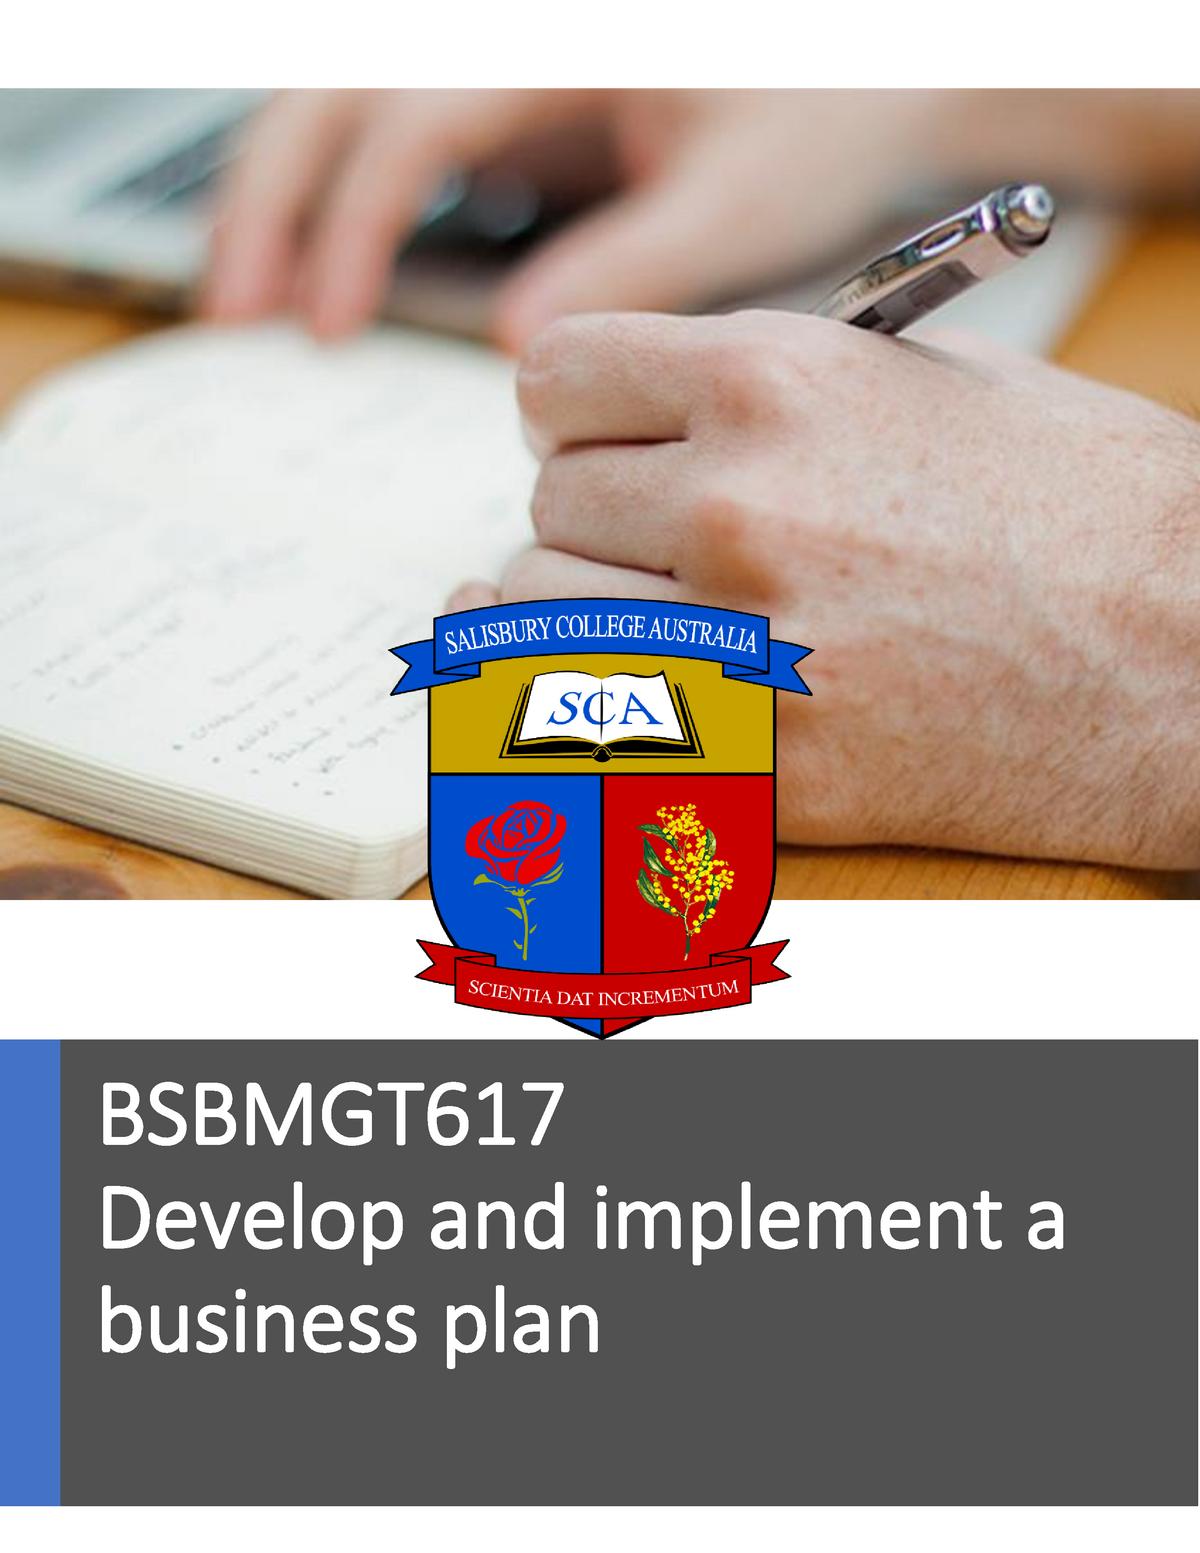 bsbmgt617 develop and implement a business plan